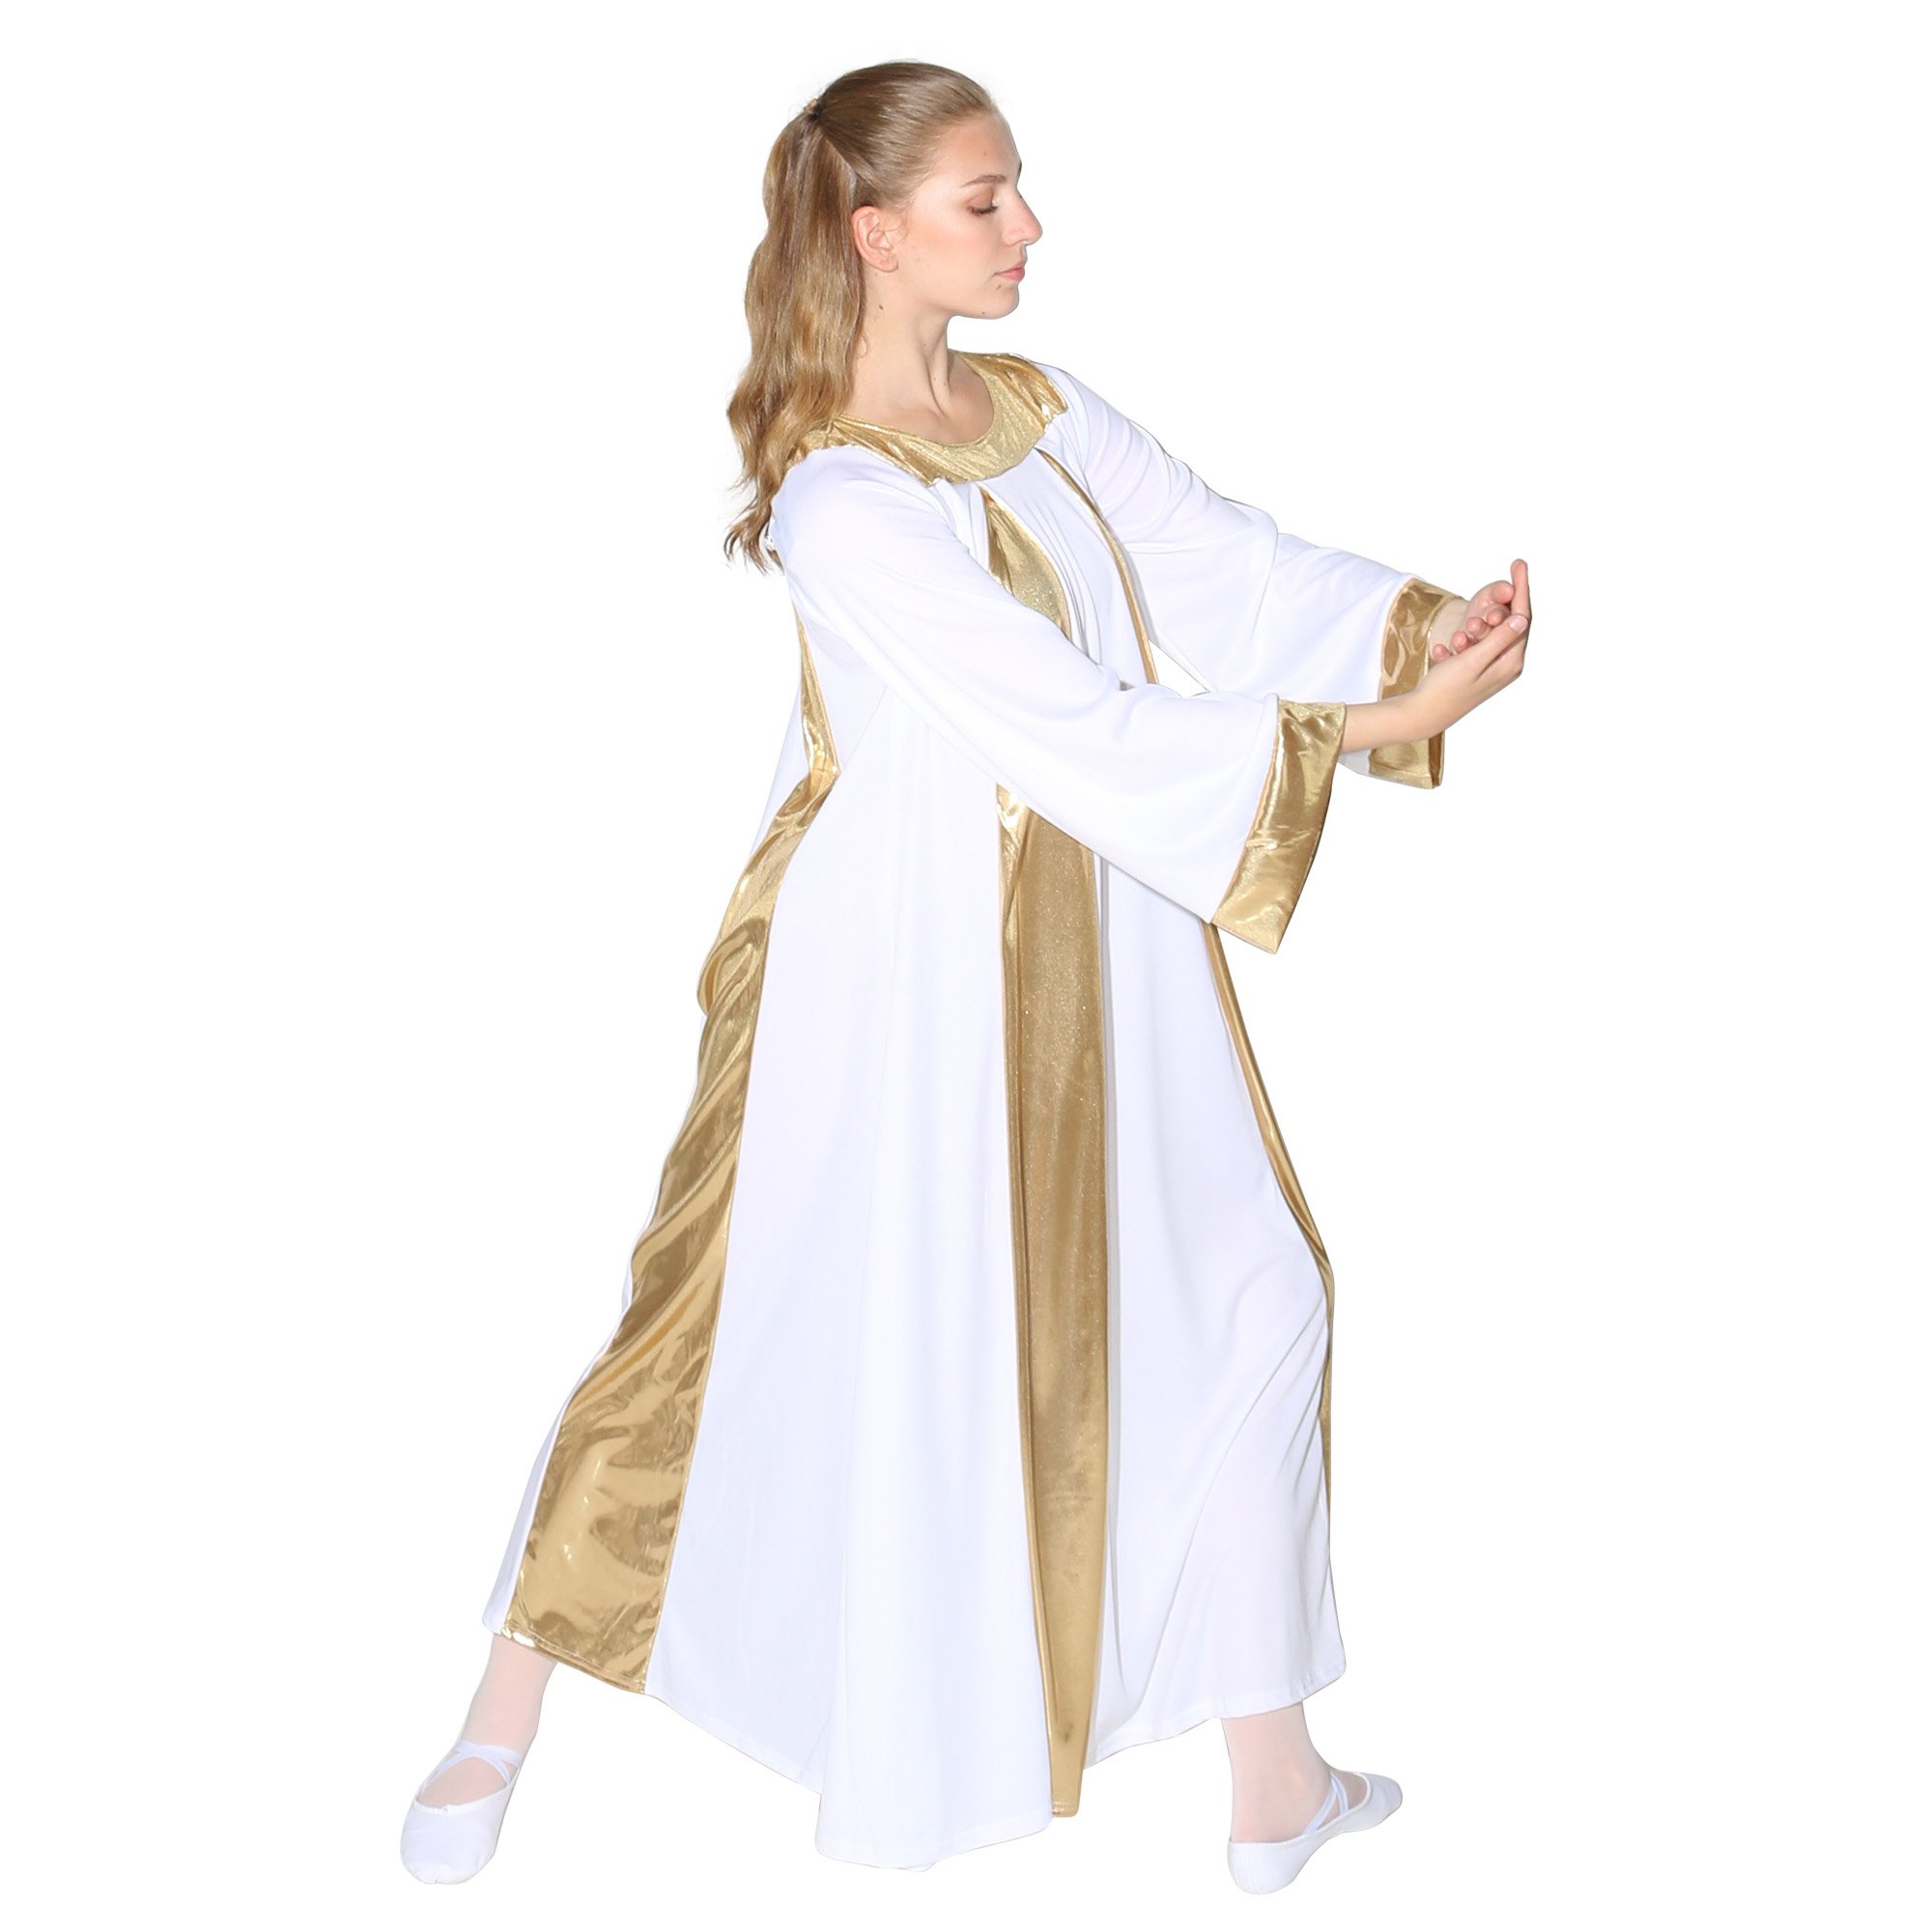 Danzcue Praise Shimmery Long Sleeve Dress - Click Image to Close